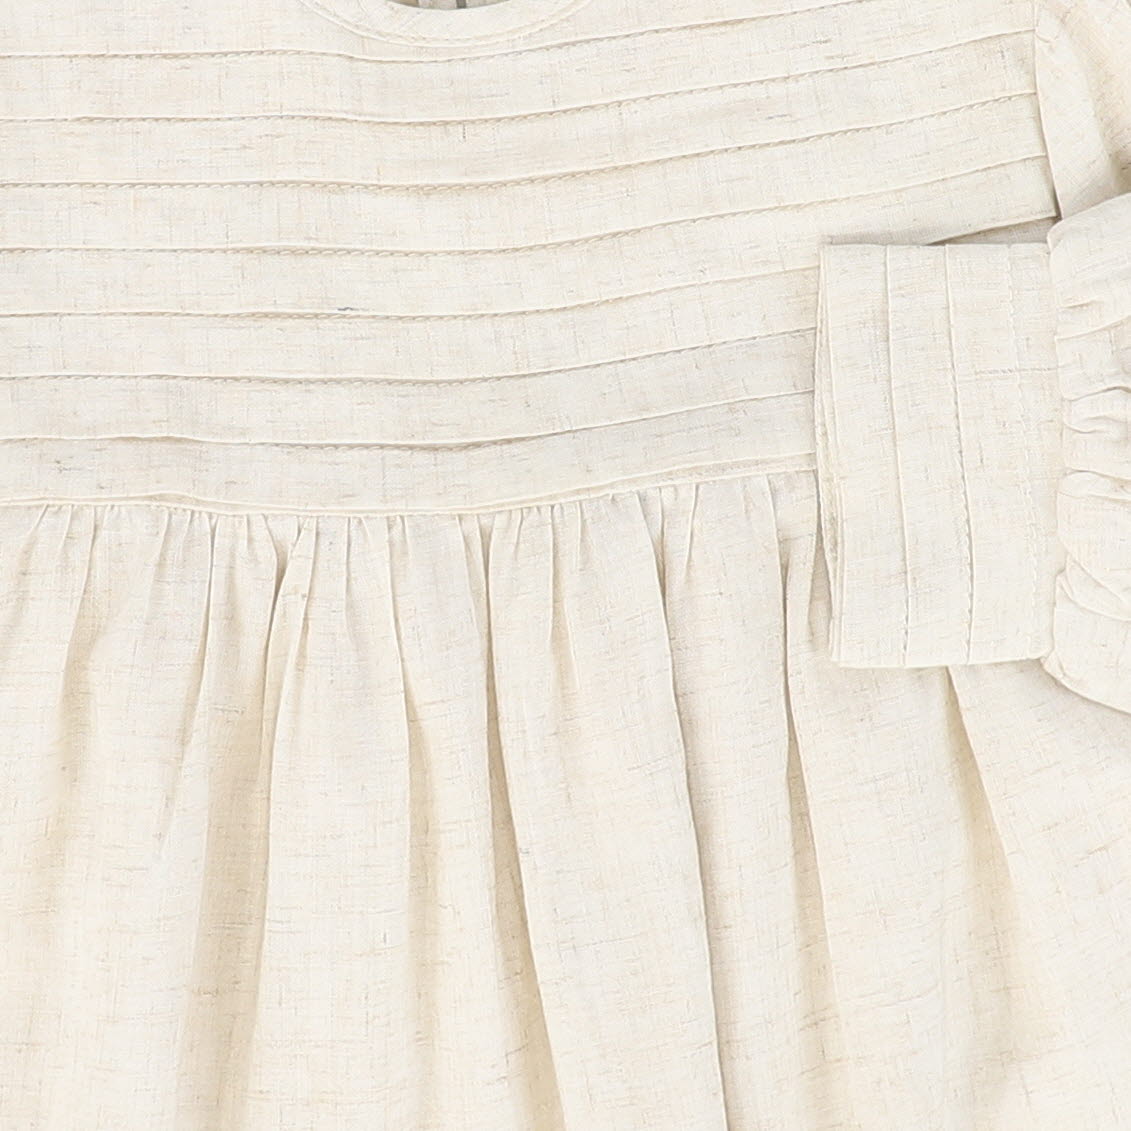 BACE COLLECTION OATMEAL PLEATED DETAIL BUBBLE DRESS [FINAL SALE]